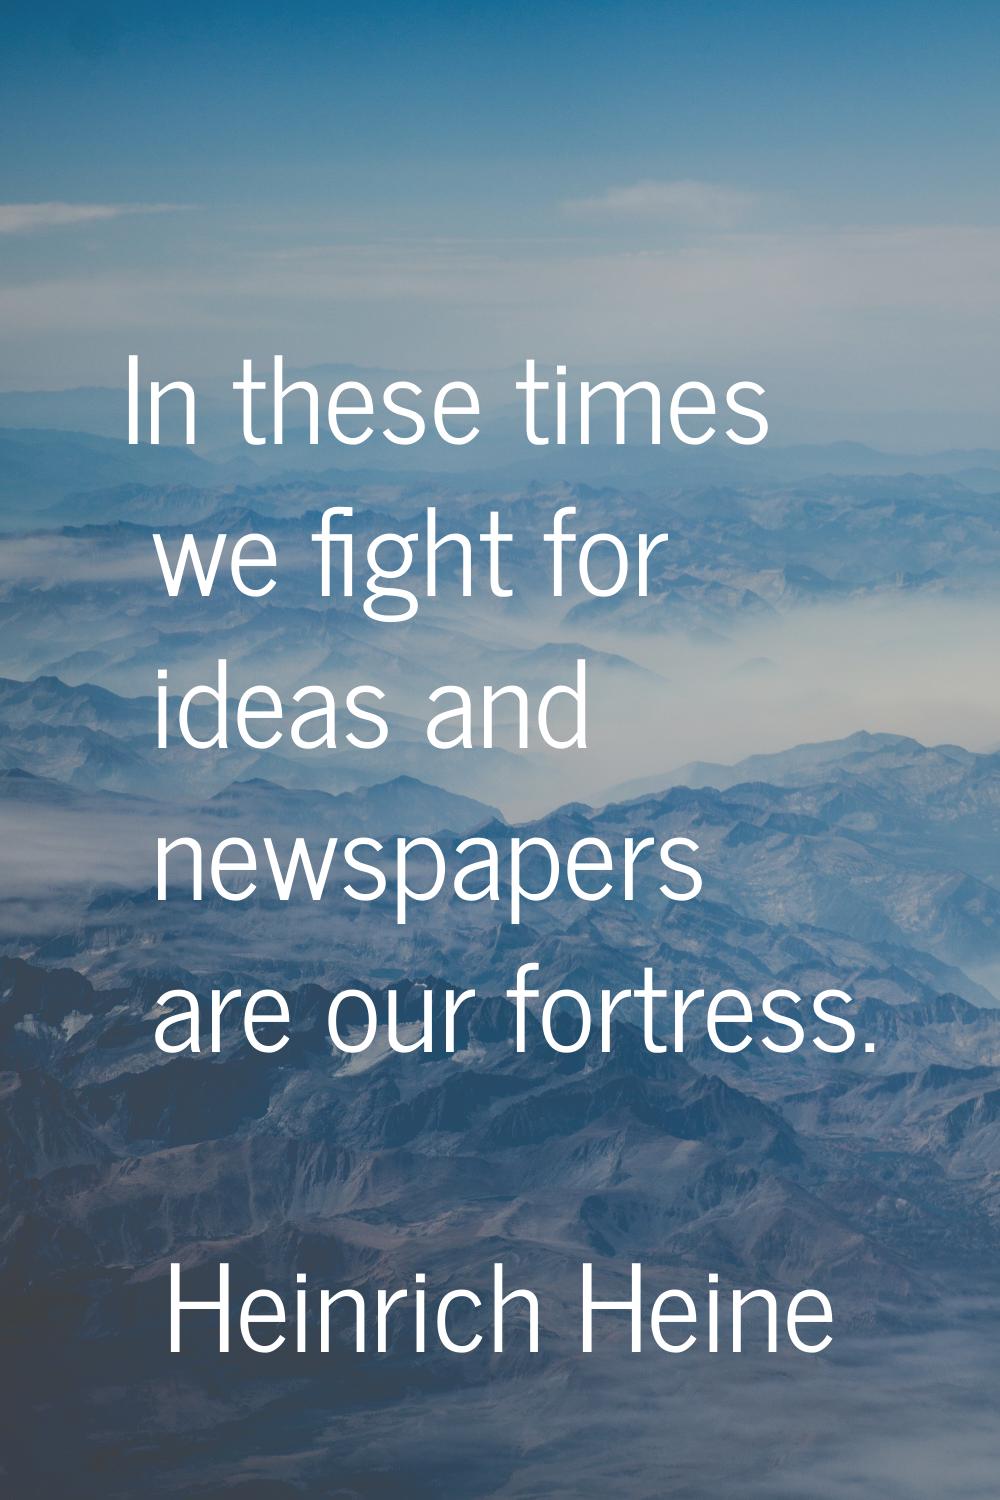 In these times we fight for ideas and newspapers are our fortress.